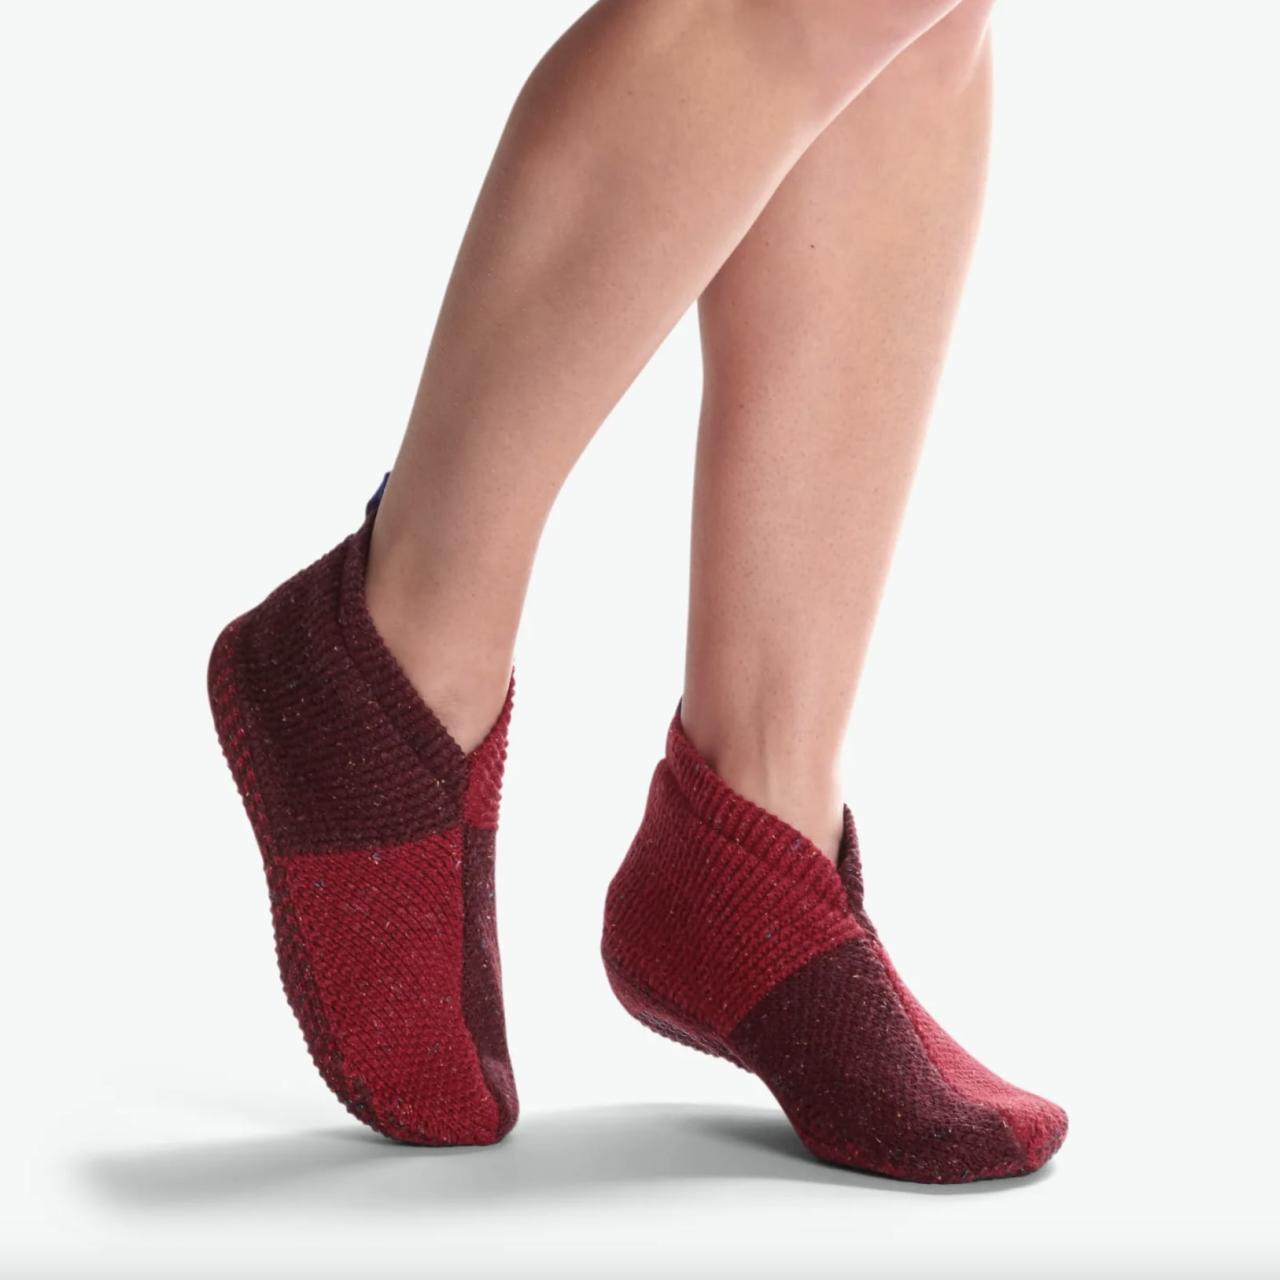 Bombas' 'Gripper Slippers' are going viral for their comfort and price